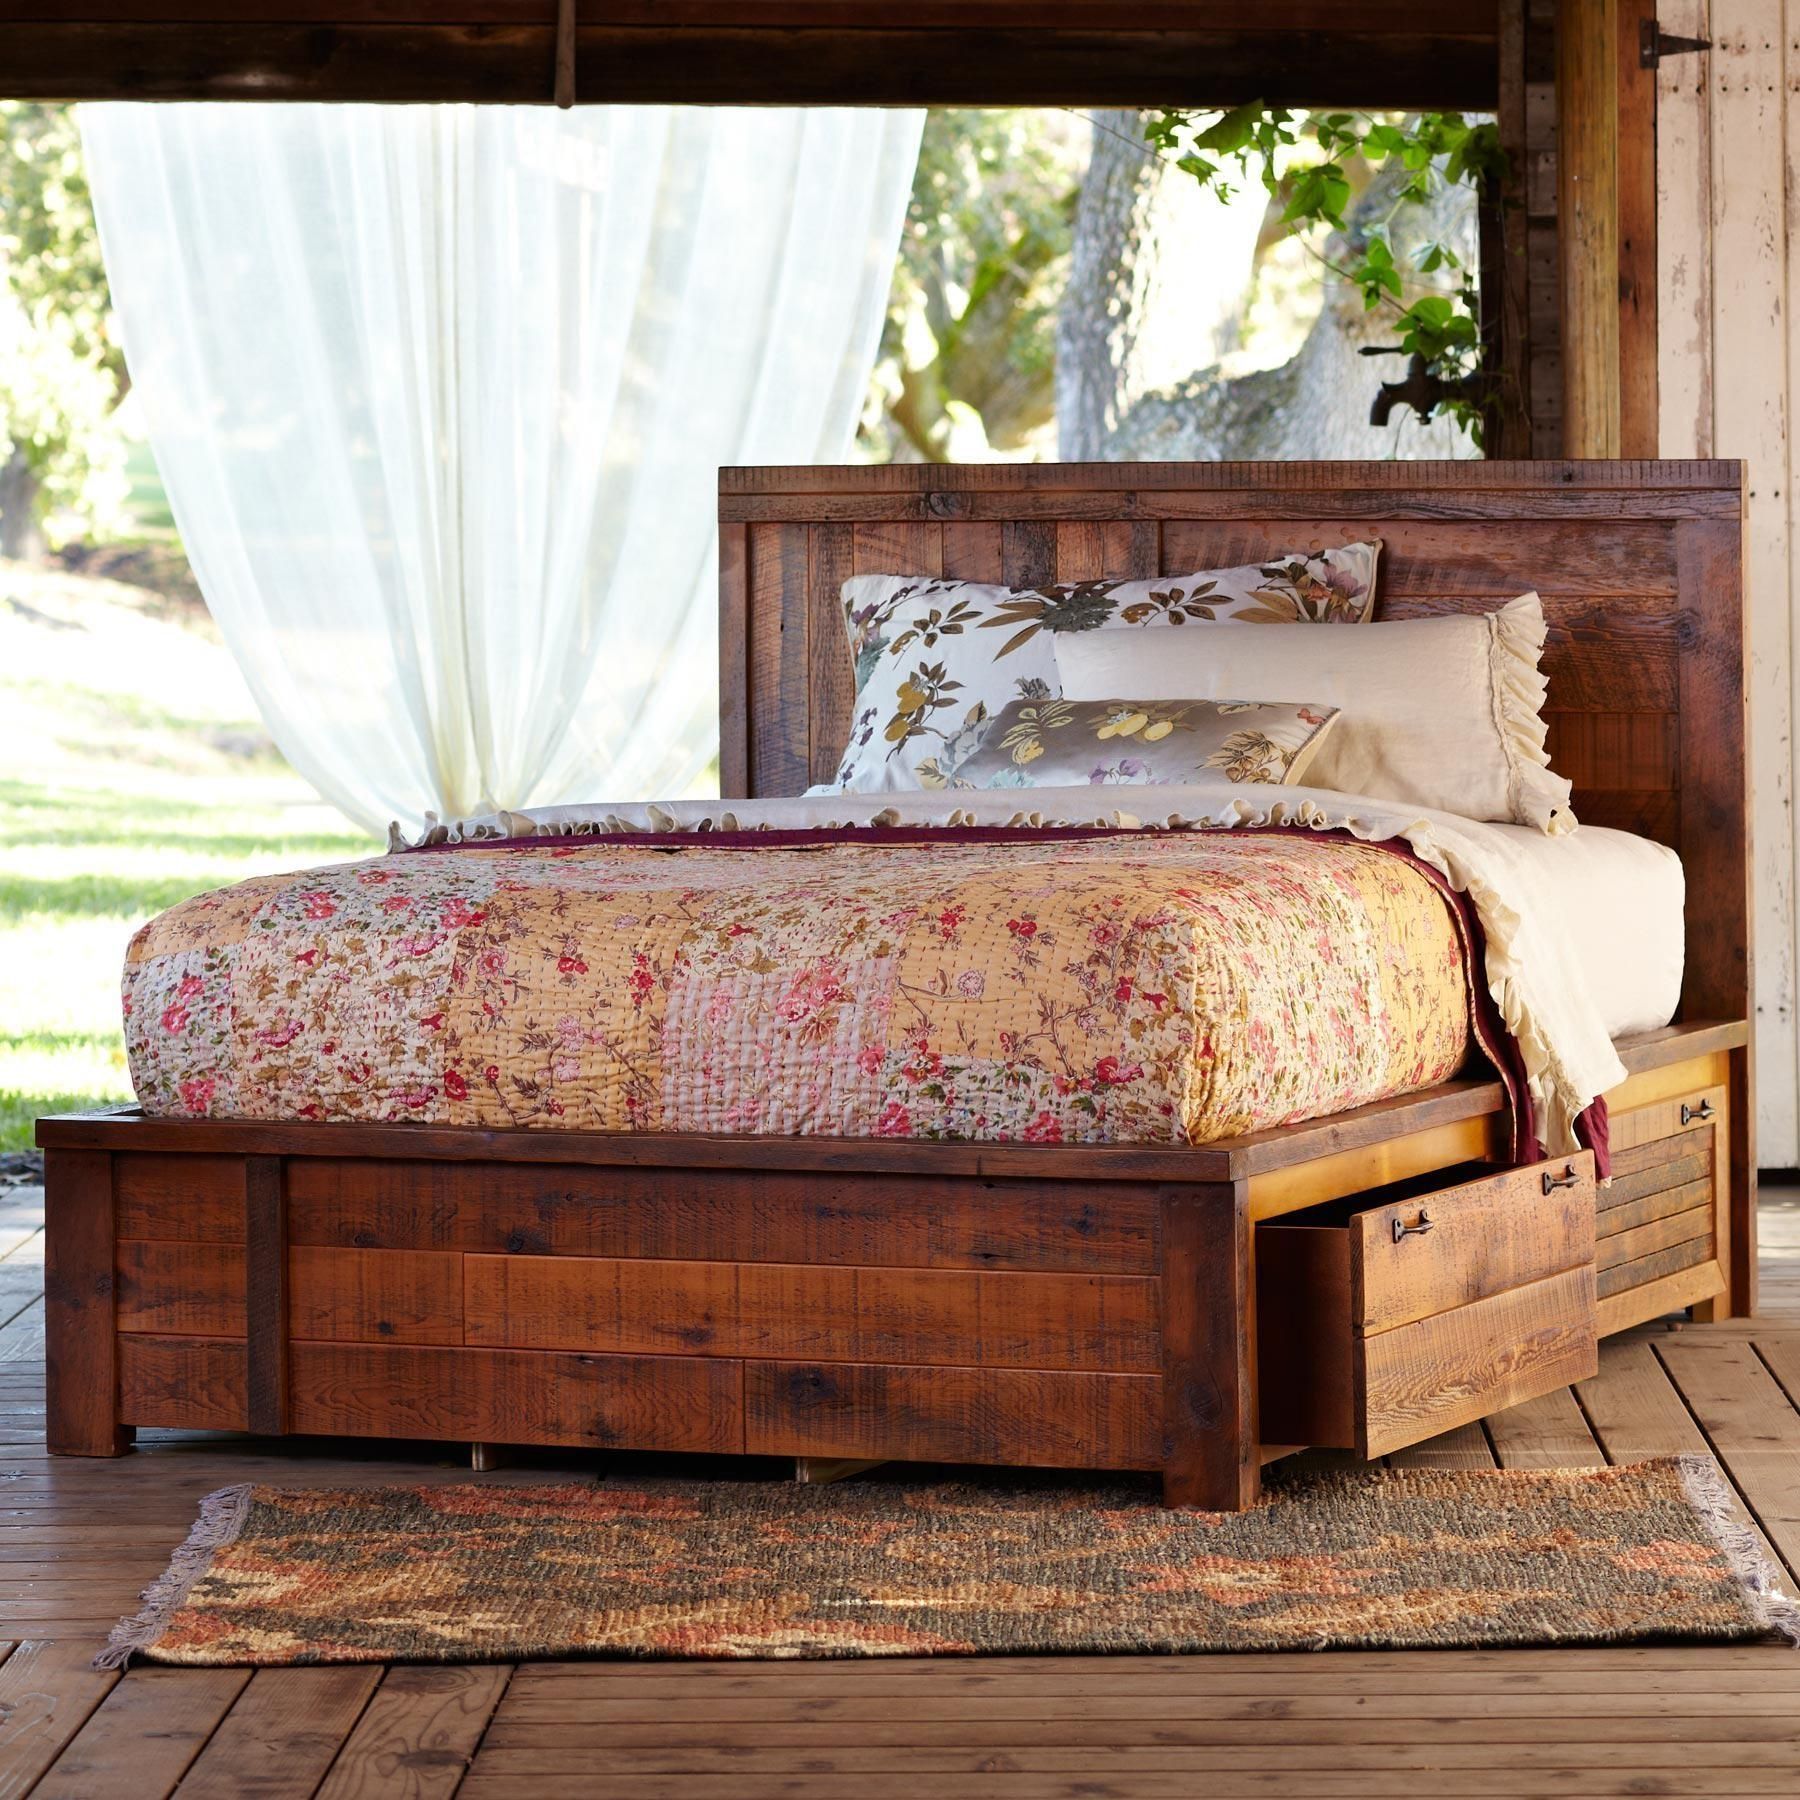 Timeless Allure of Wooden Beds